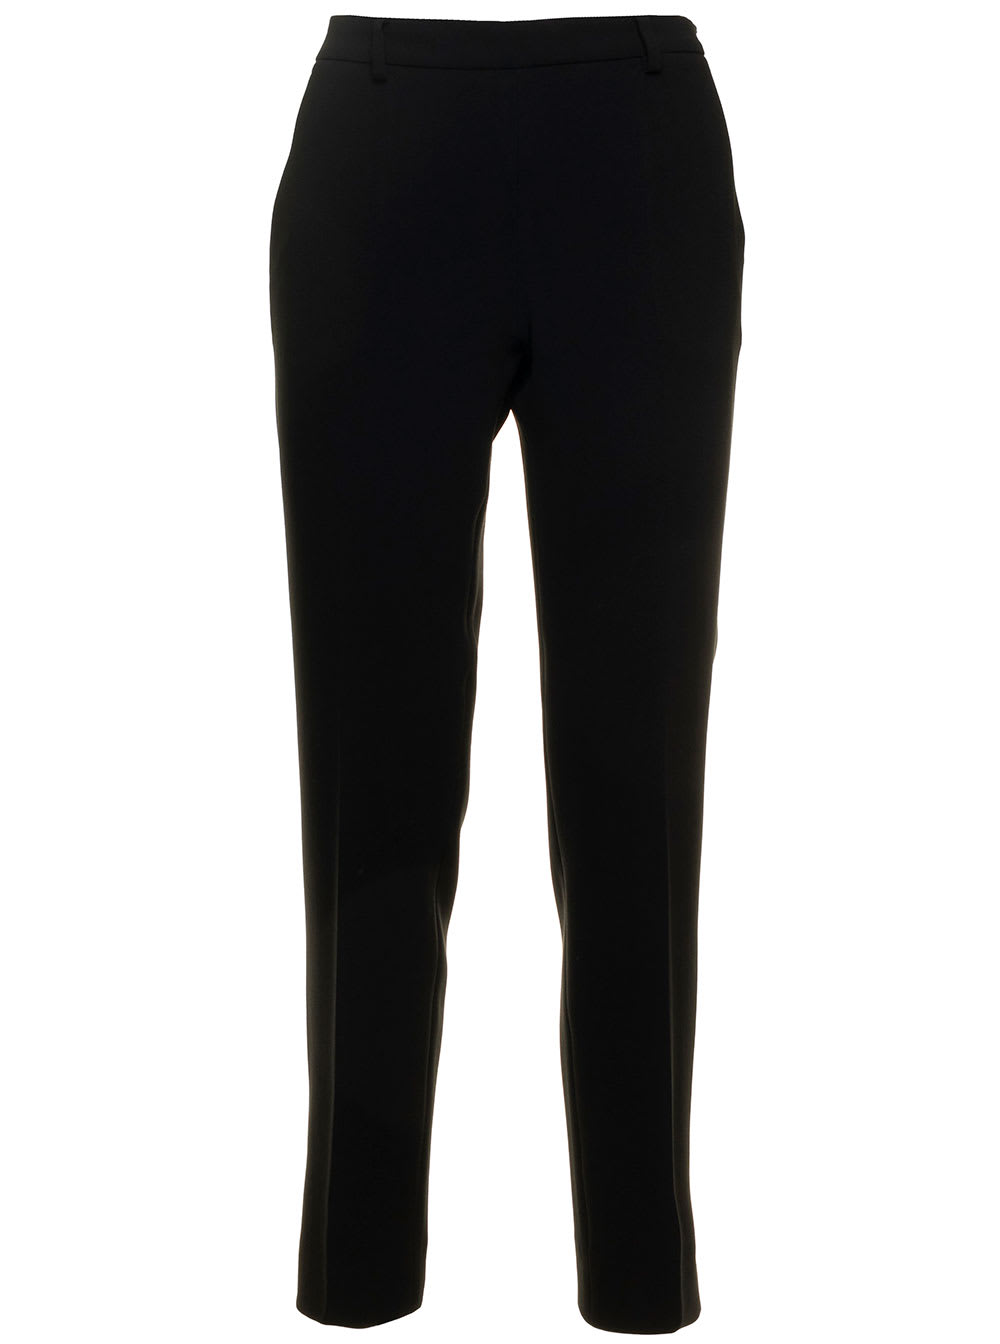 Black Pants With Side Pockets In Stretch Fabric Woman